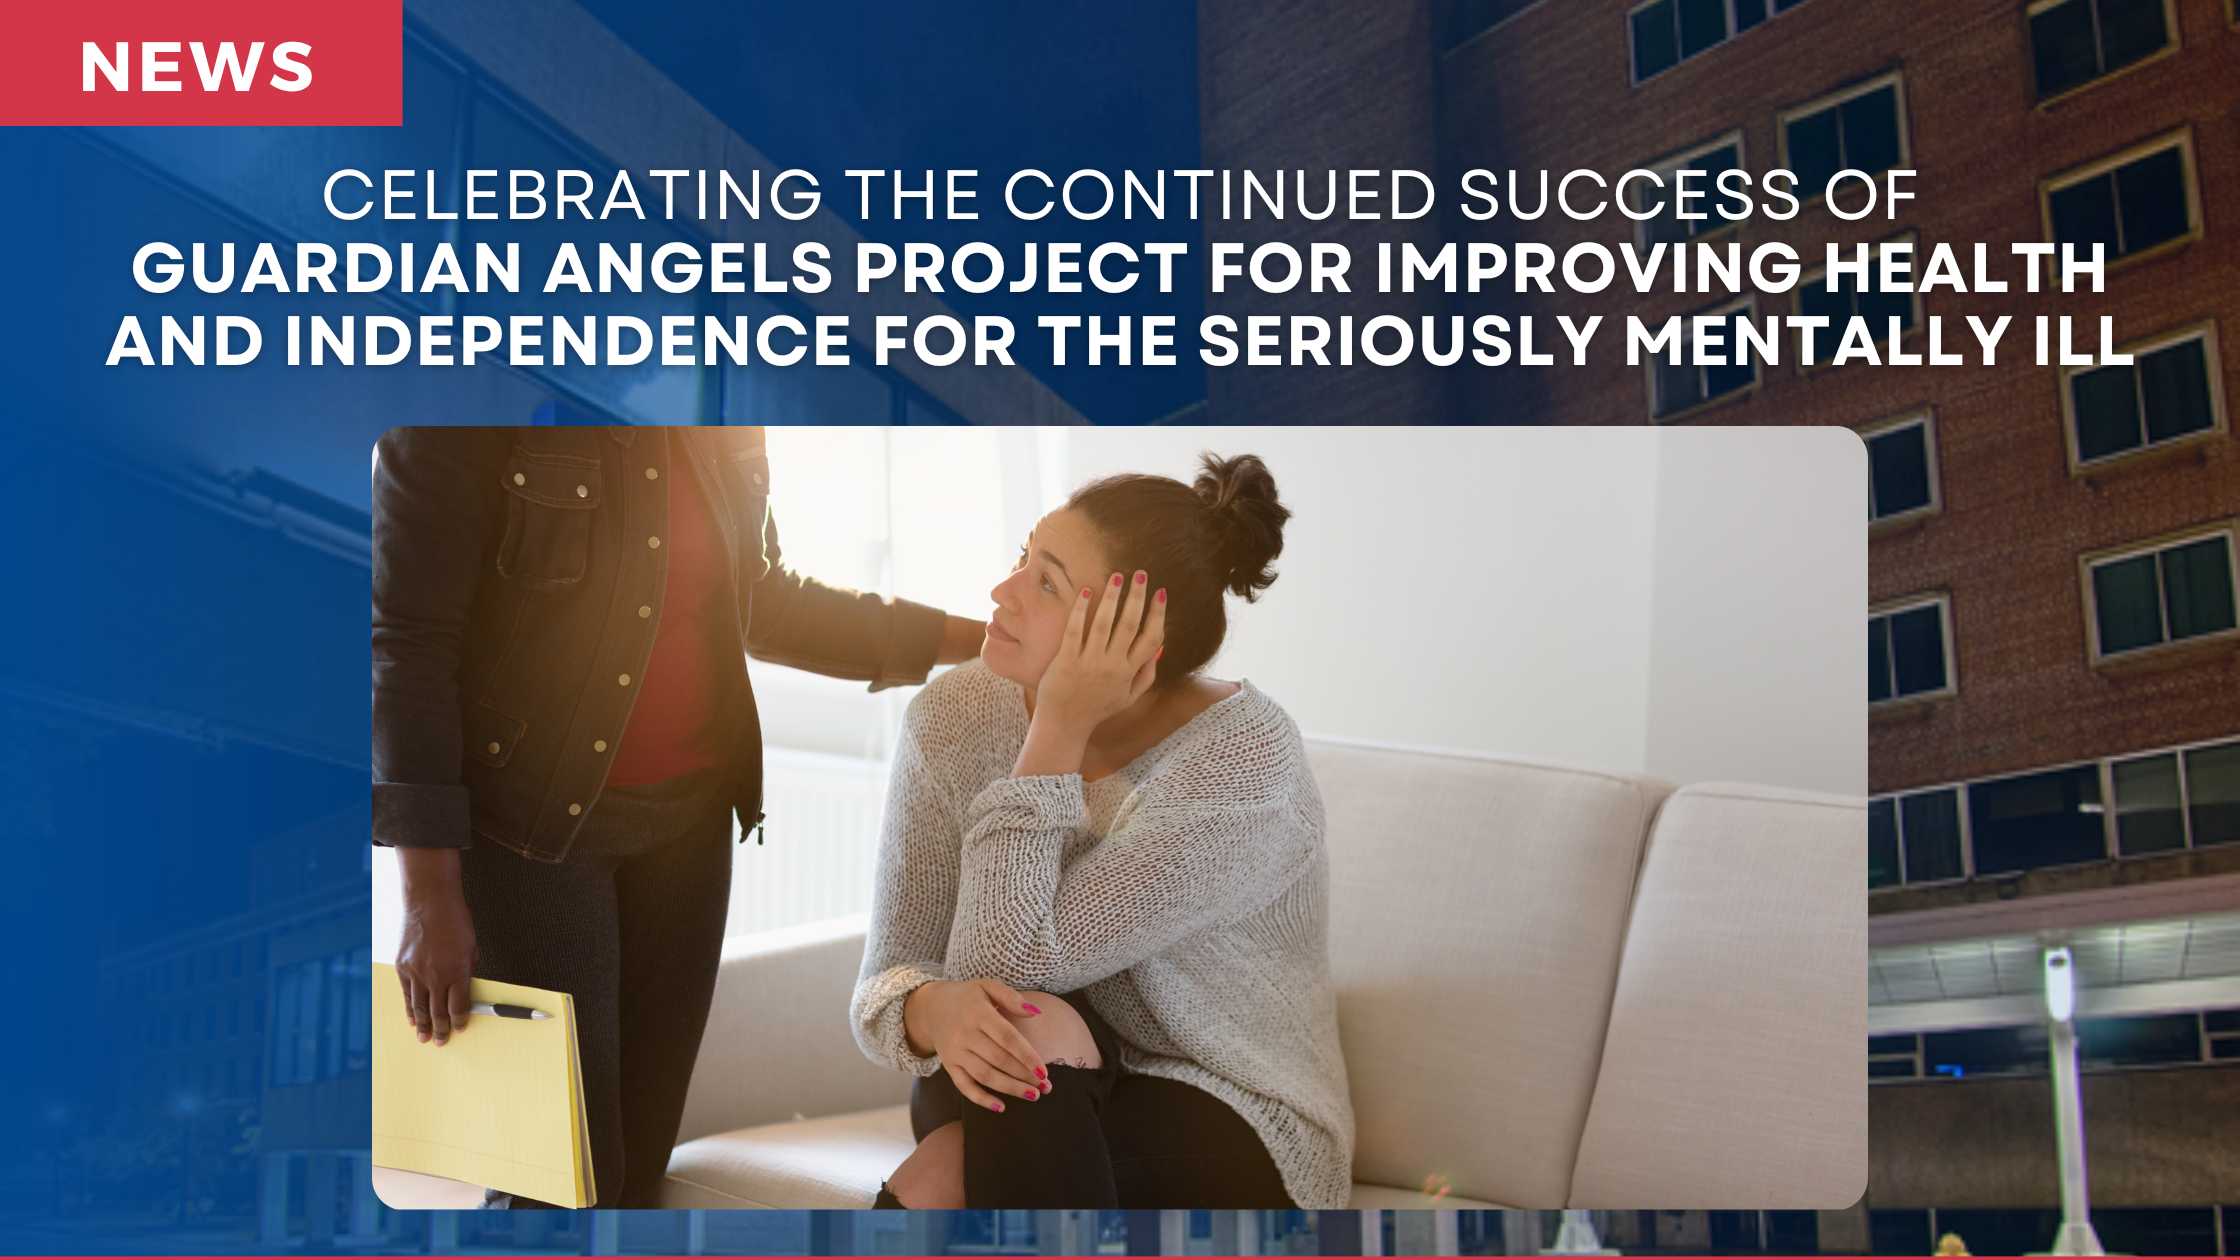 Niagara Falls Memorial Medical Center Celebrates Continued Success of Guardian Angels Project for Improving Health and Independence for the Seriously Mentally Ill